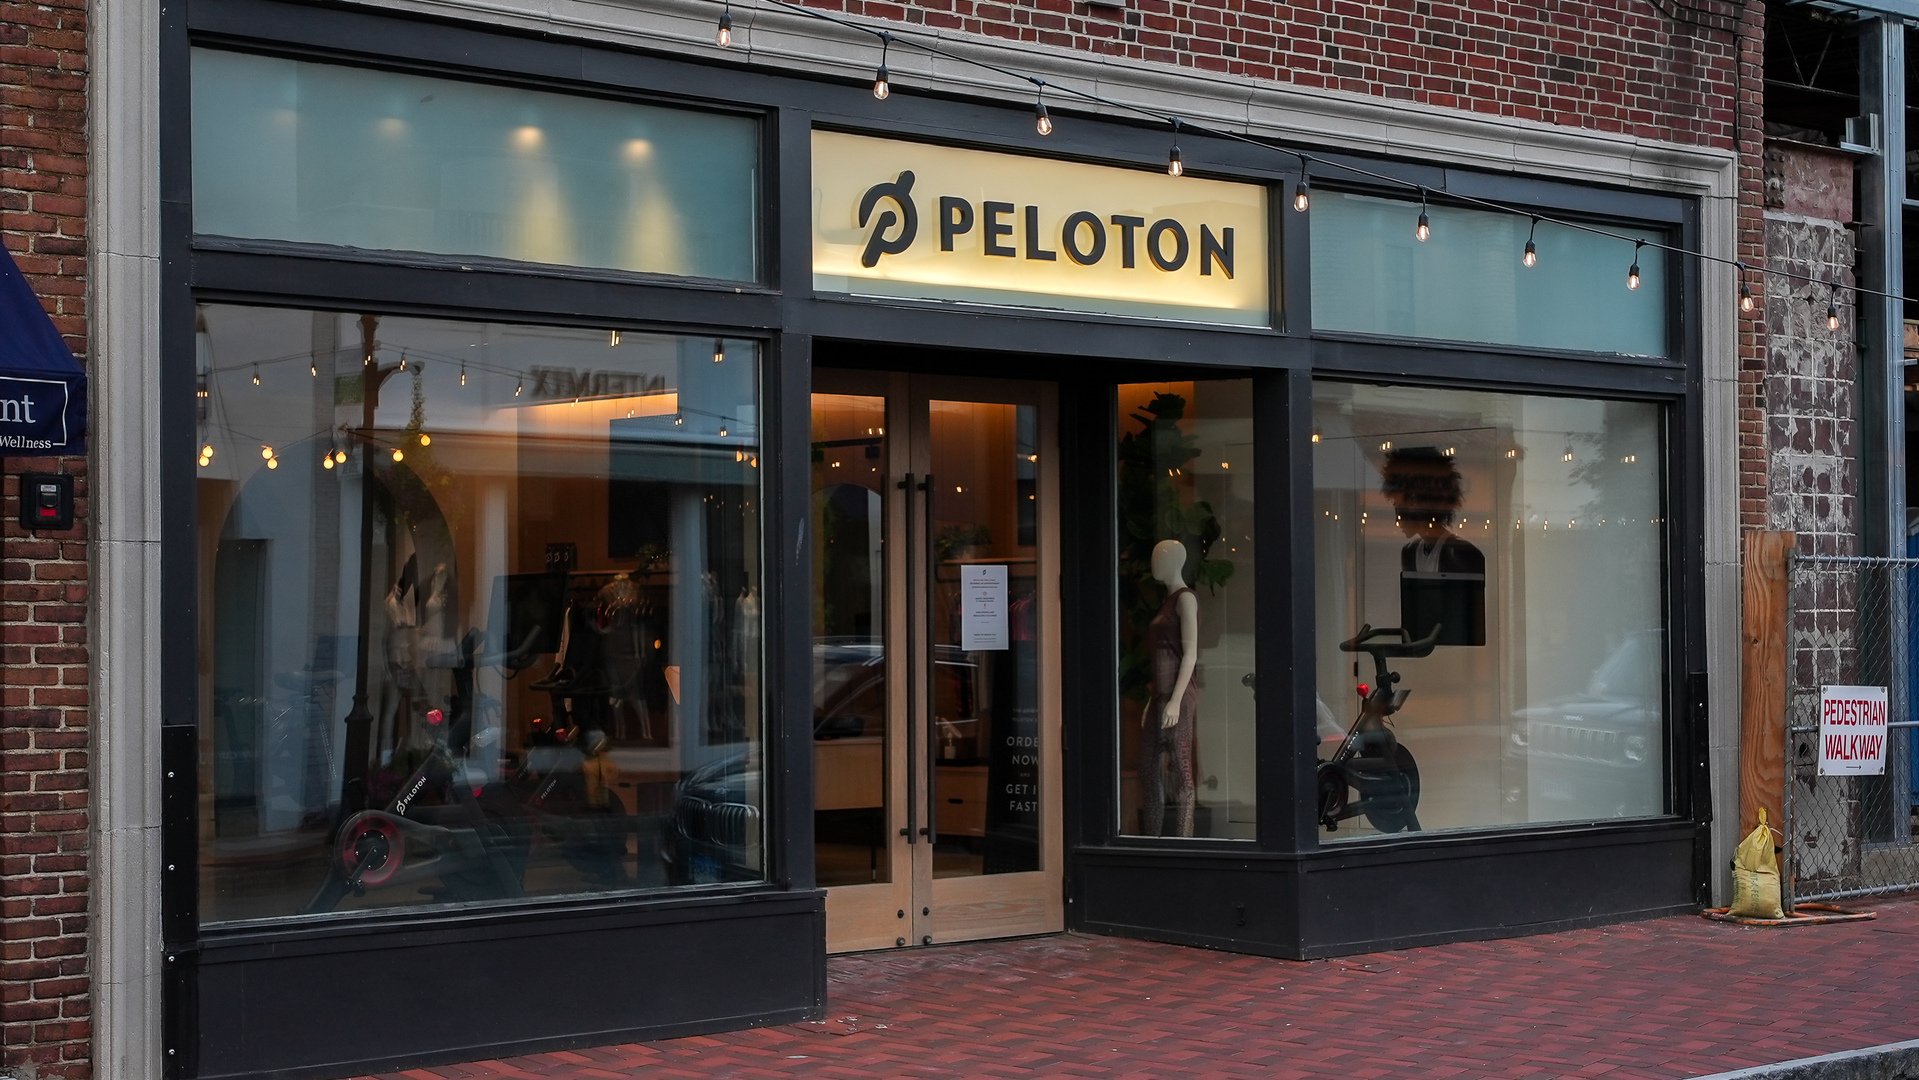 Peloton Adds Set Up Fees Amid Financial Struggle – How Much More Will the At-Home Gym Cost You?